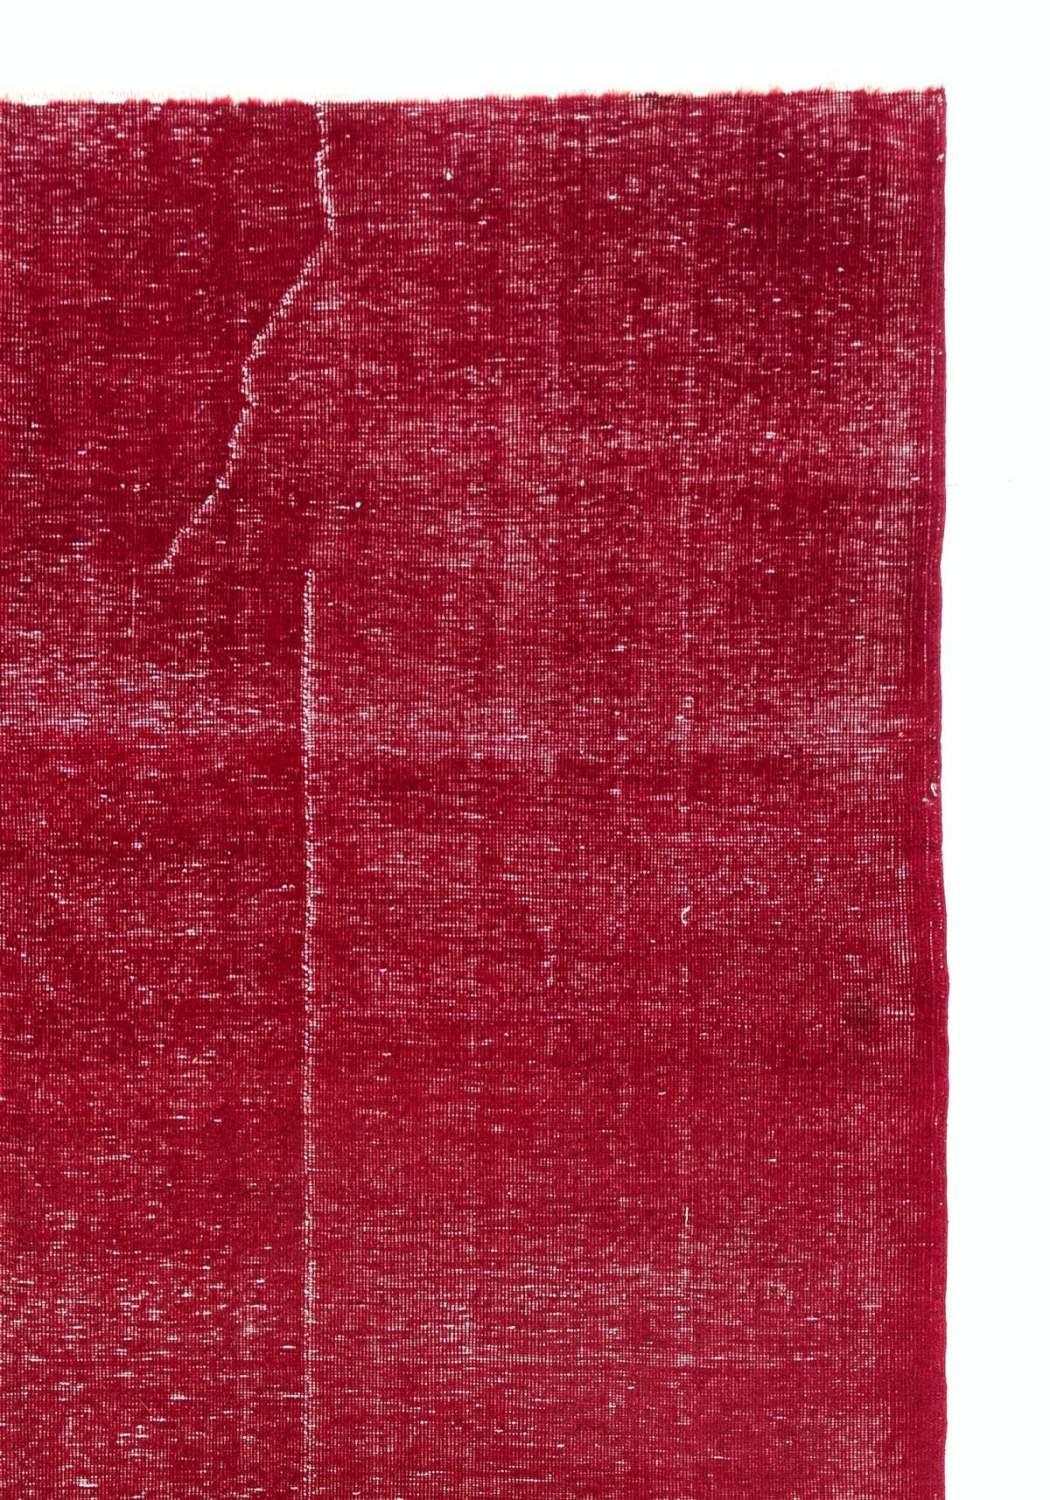 Turkish 6.7x10 Ft Plain Vintage Handmade Rug Overdyed in Red for Modern Interiors For Sale